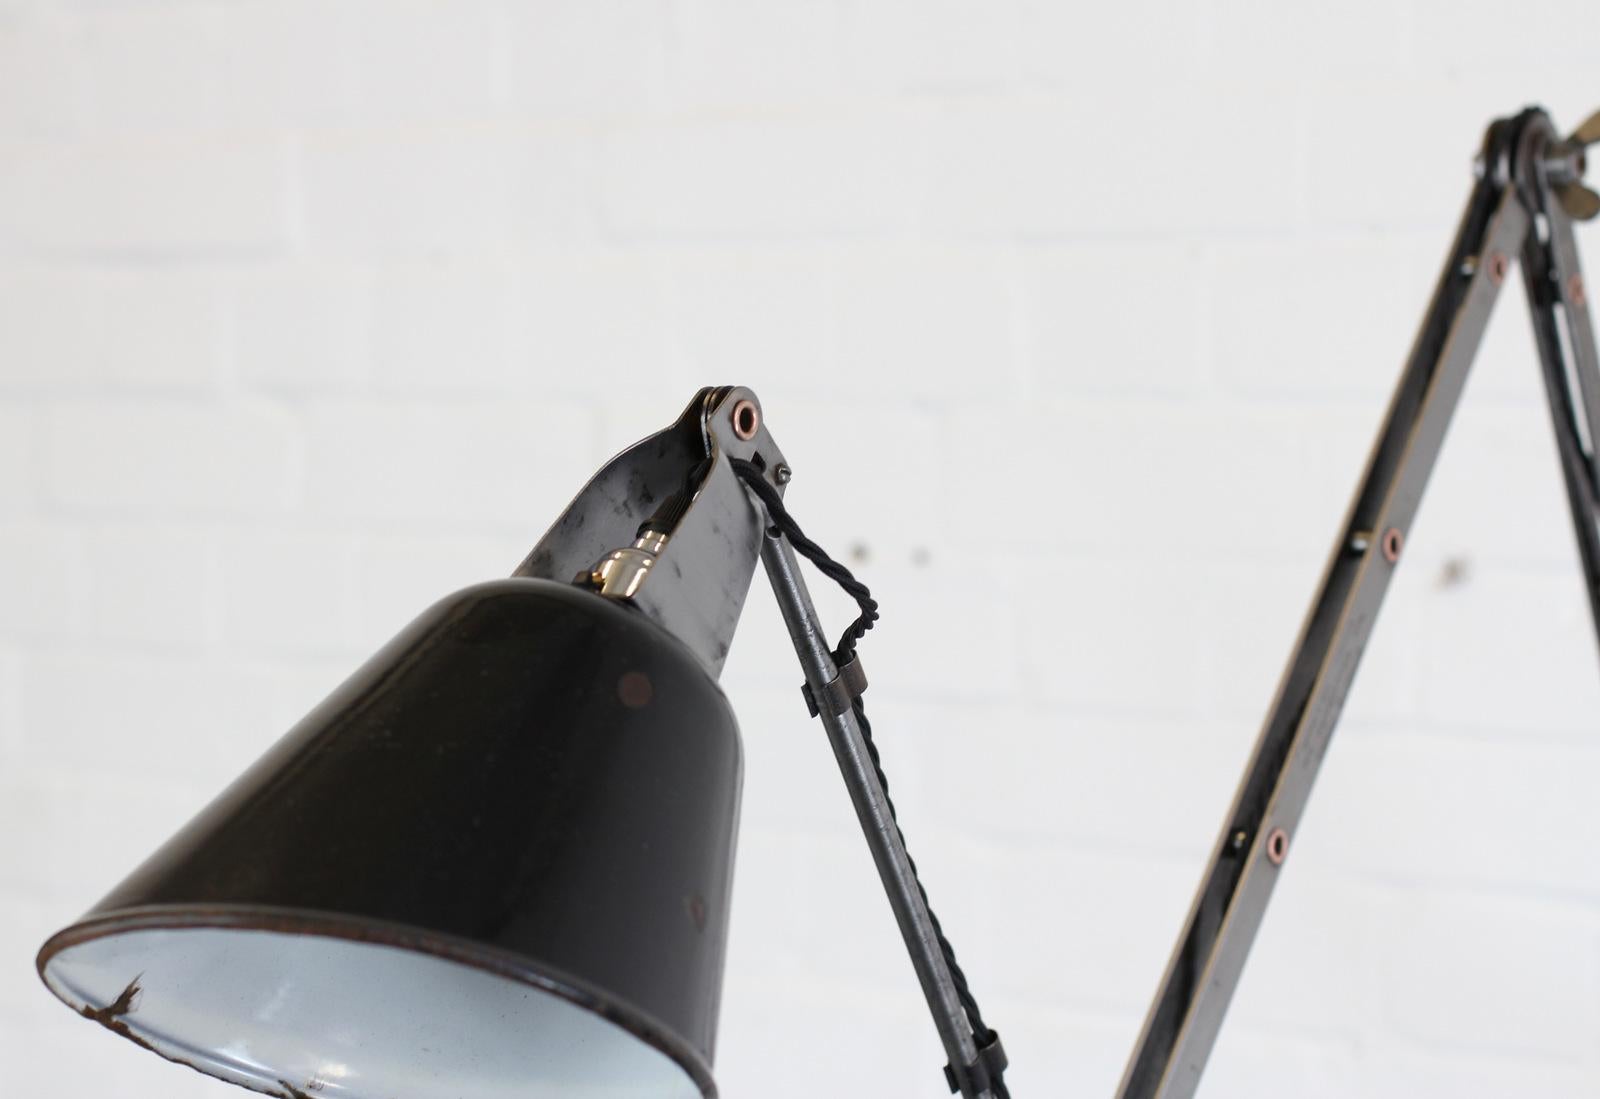 Wall-mounted Industrial lamp by Walligraph, circa 1930s

- Sharp angled shade
- Vitreous black enamel shade
- 3 articulated arms
- Embossed makers marks on each arm
- Takes B22 fitting bulbs
- On/off switch on the head
- English, circa